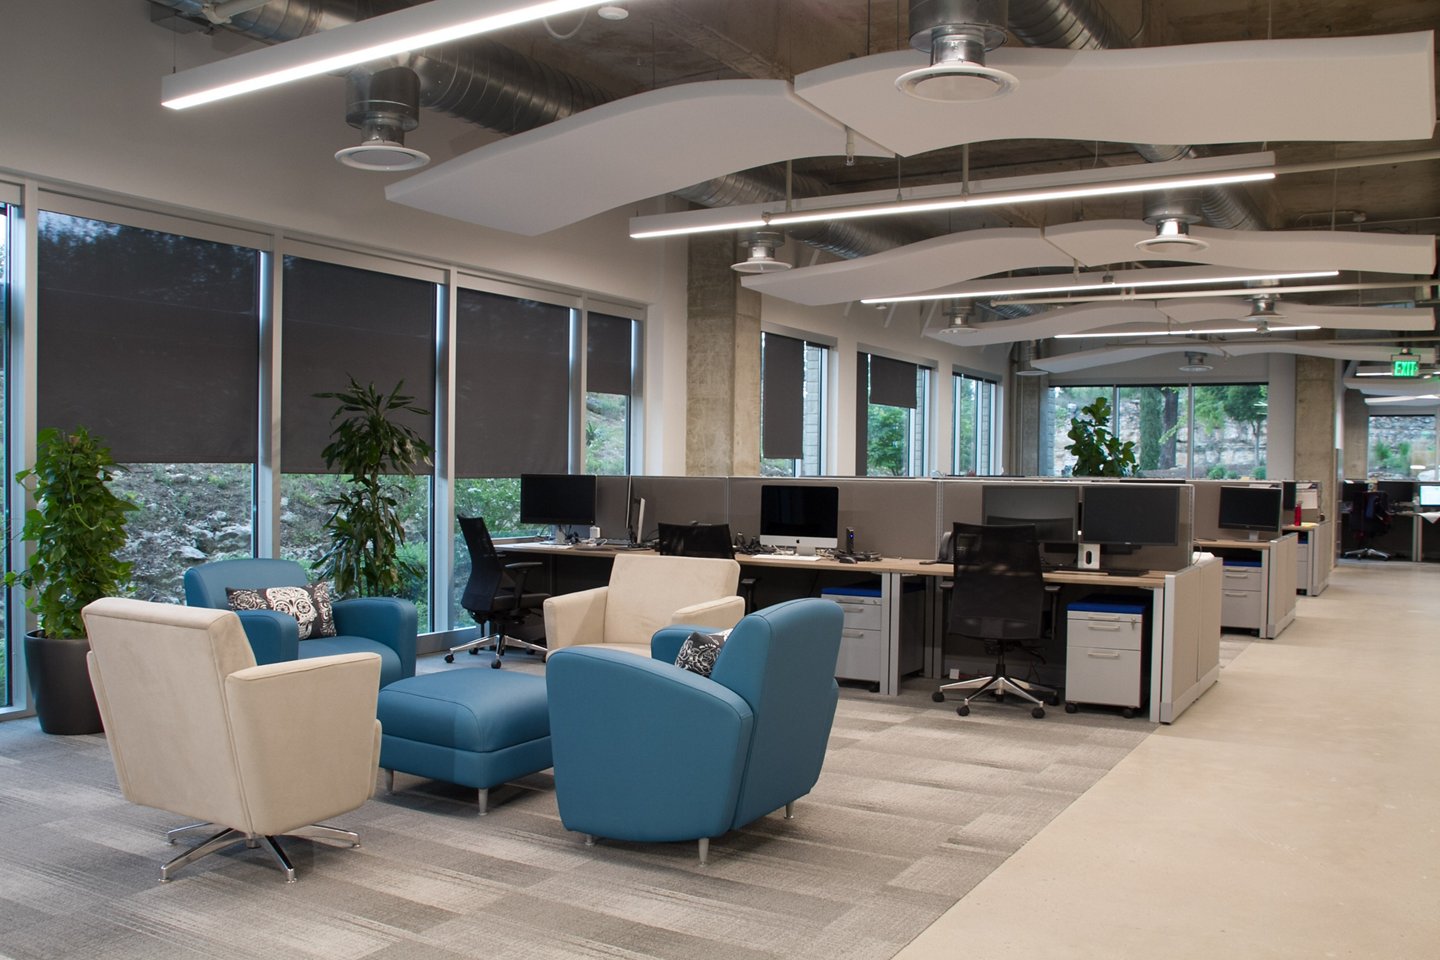 Cubicle Styles & Panel System Designs. Wondering how to buy office cubicles? Whether you’re outfitting a large business or adding a few panels, this task can be a daunting one, Read this blog to help answer this question.